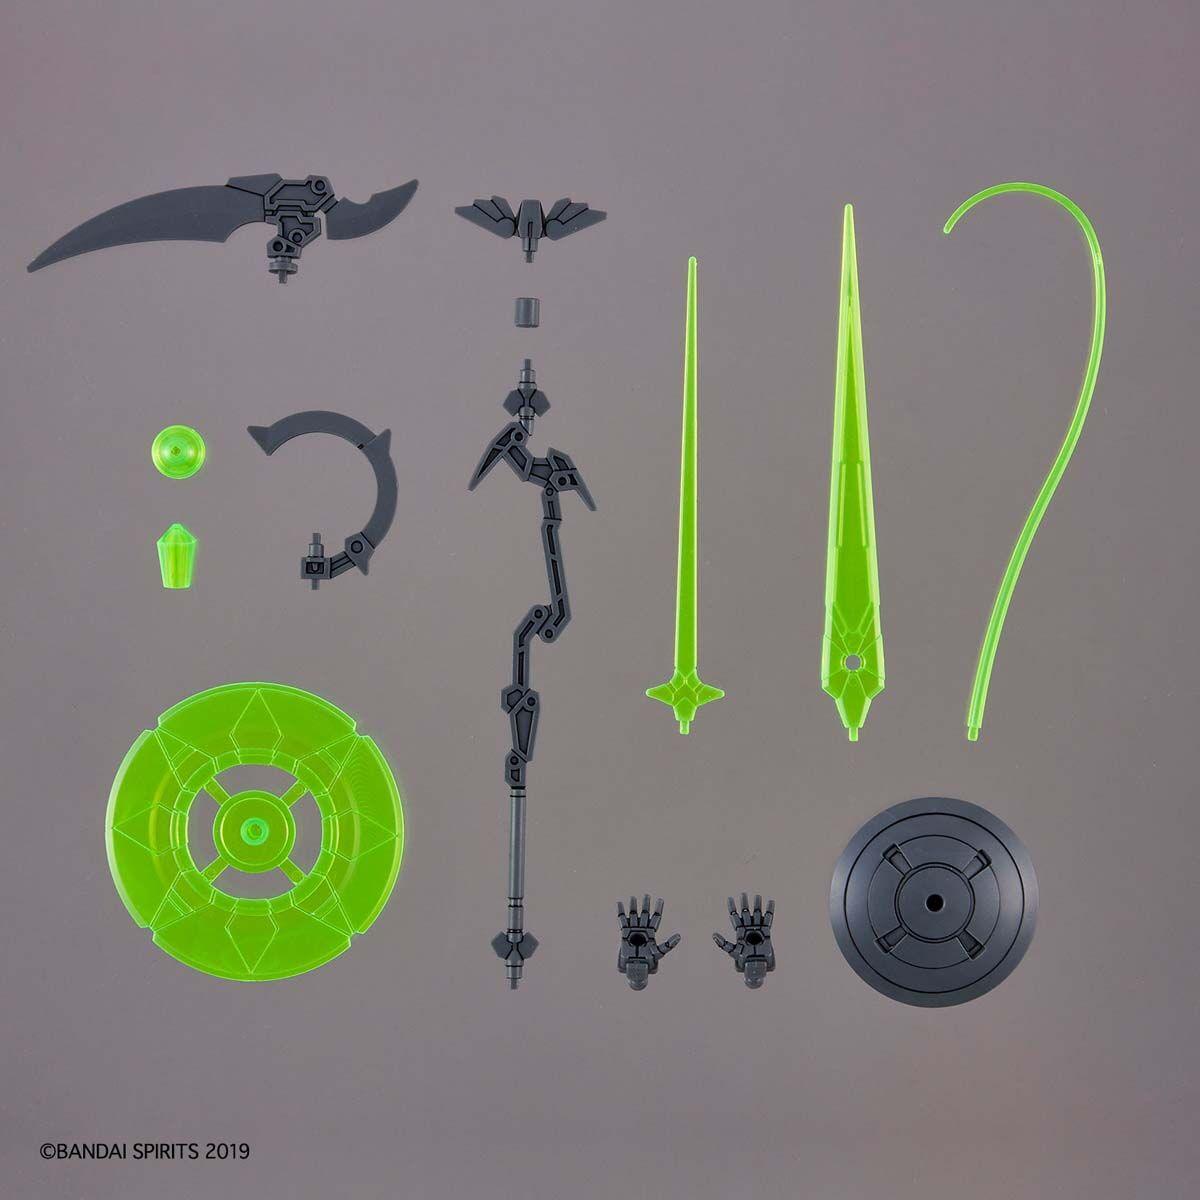 BANDAI 30MM W013 CUSTOMIZE WEAPONS (WITCHCRAFT WEAPON) - SaQra Mart Hobby